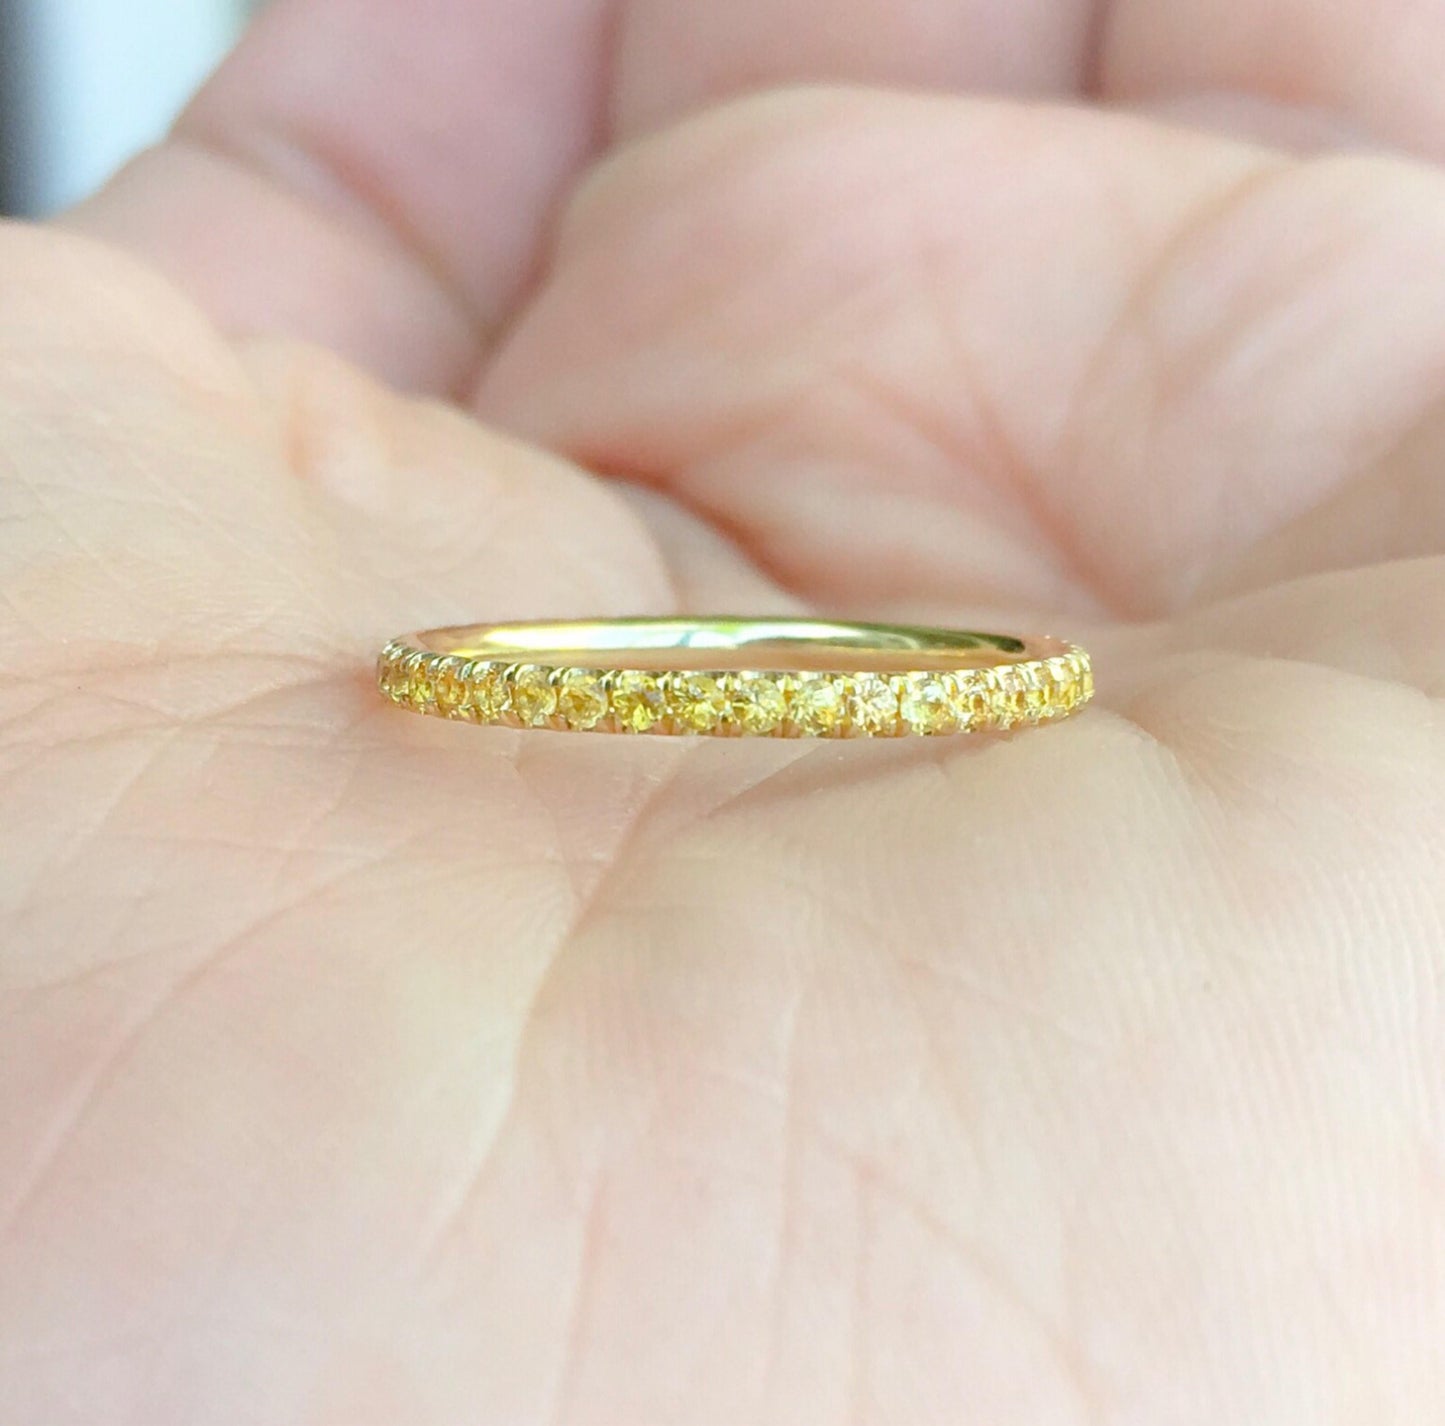 Set of 3 Bands; 2 1.6mm Full Eternity Yellow Sapphire Pave Bands, 1 2.5mm 14K Plain Band